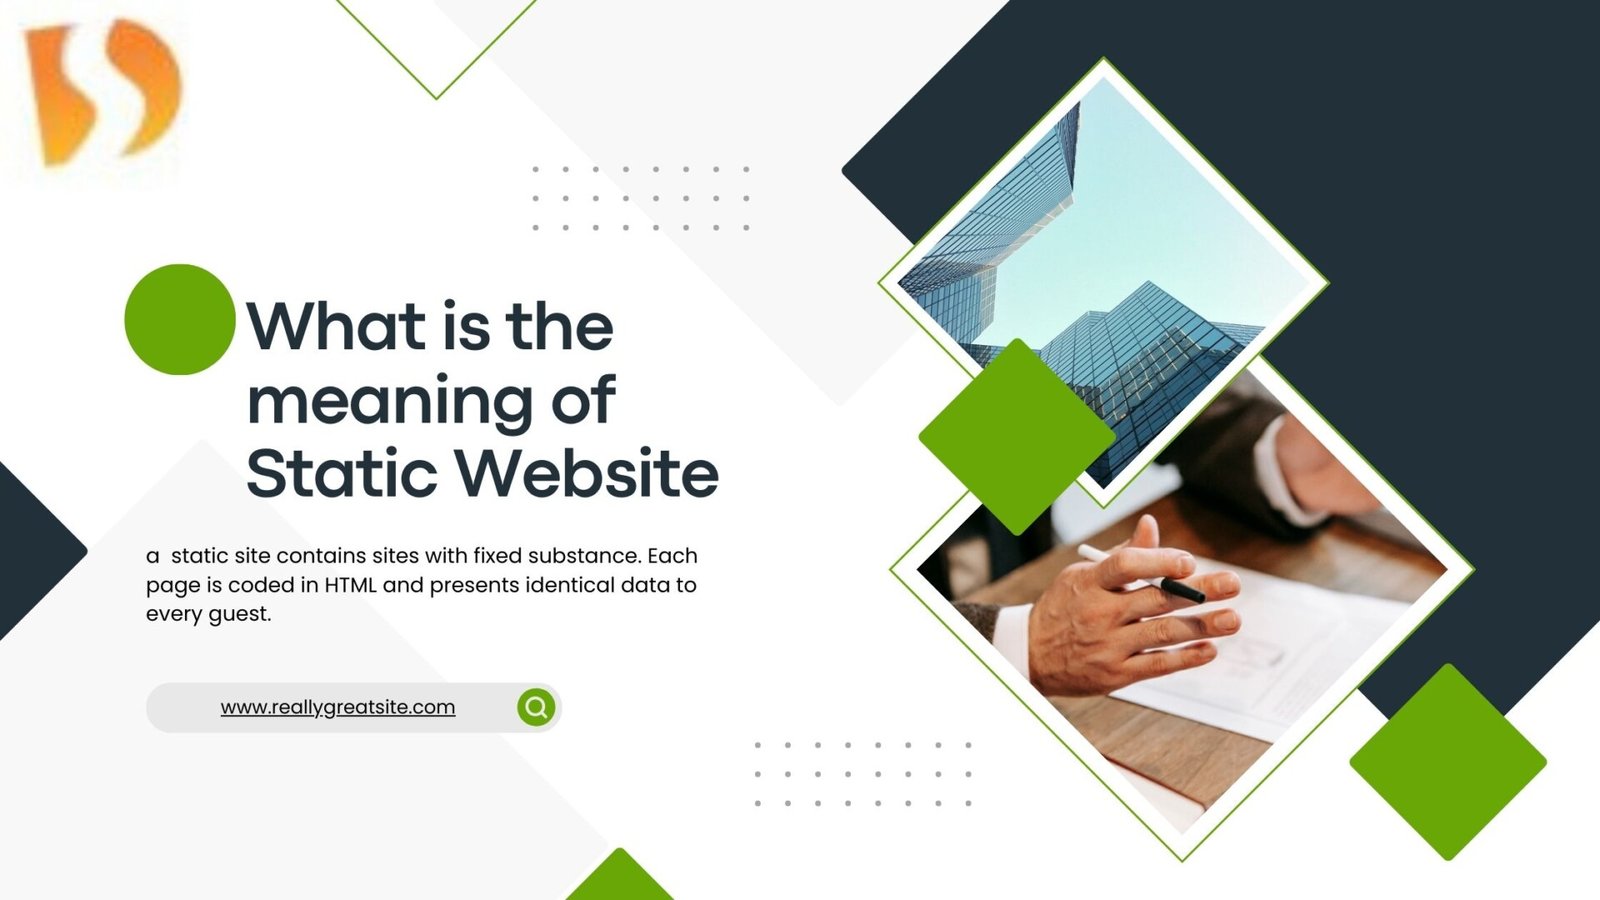 What is the meaning of Static Website and Explain In Brief